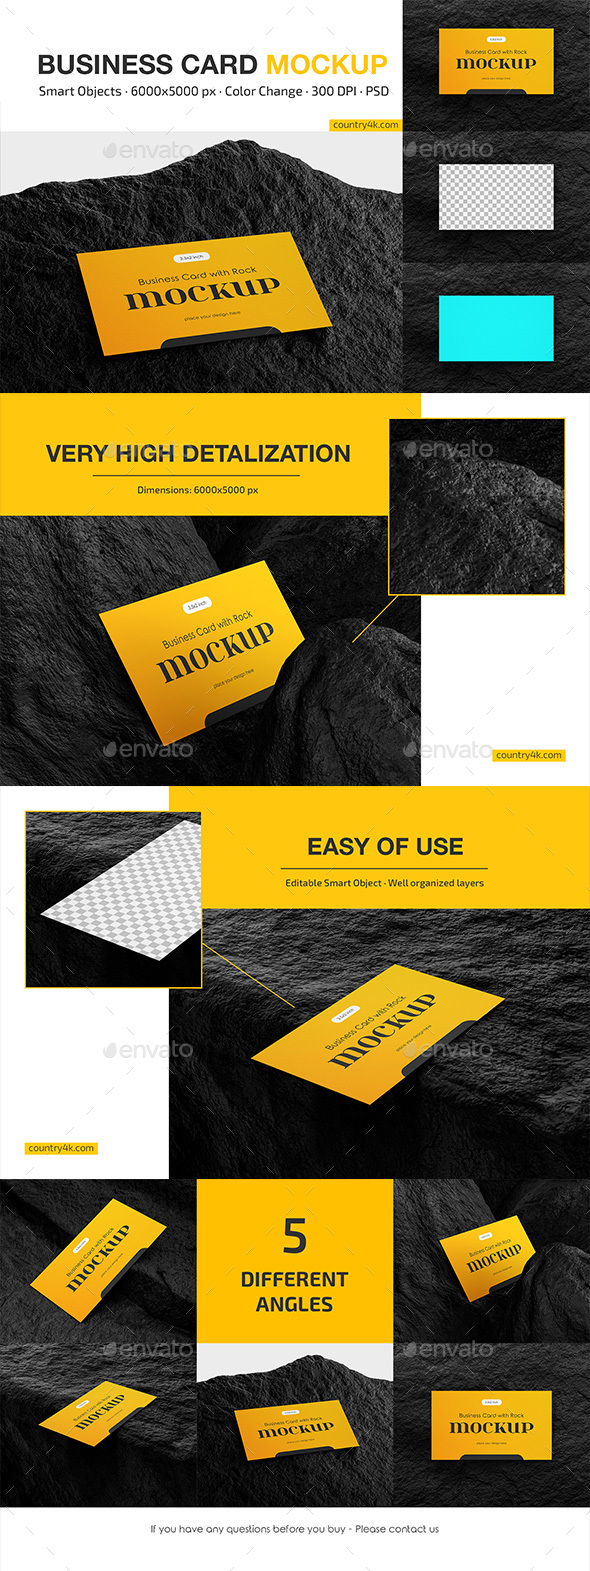 [DOWNLOAD]Business Card with Rock Mockup Set